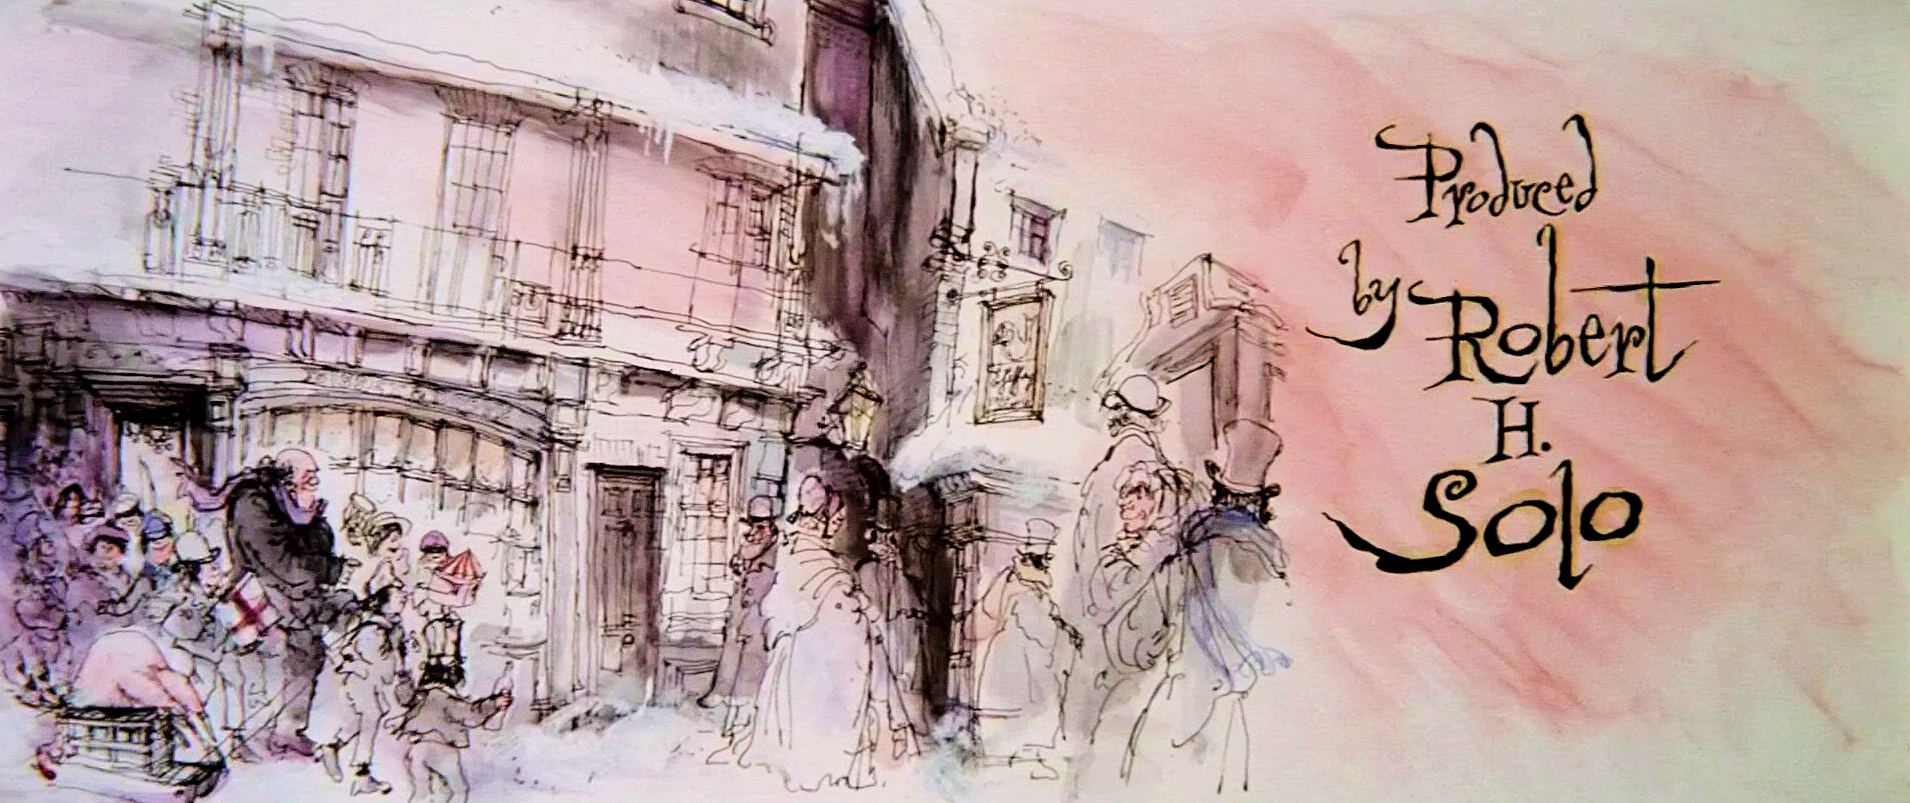 Main title from Scrooge (1970) (27). Produced by Robert H Solo